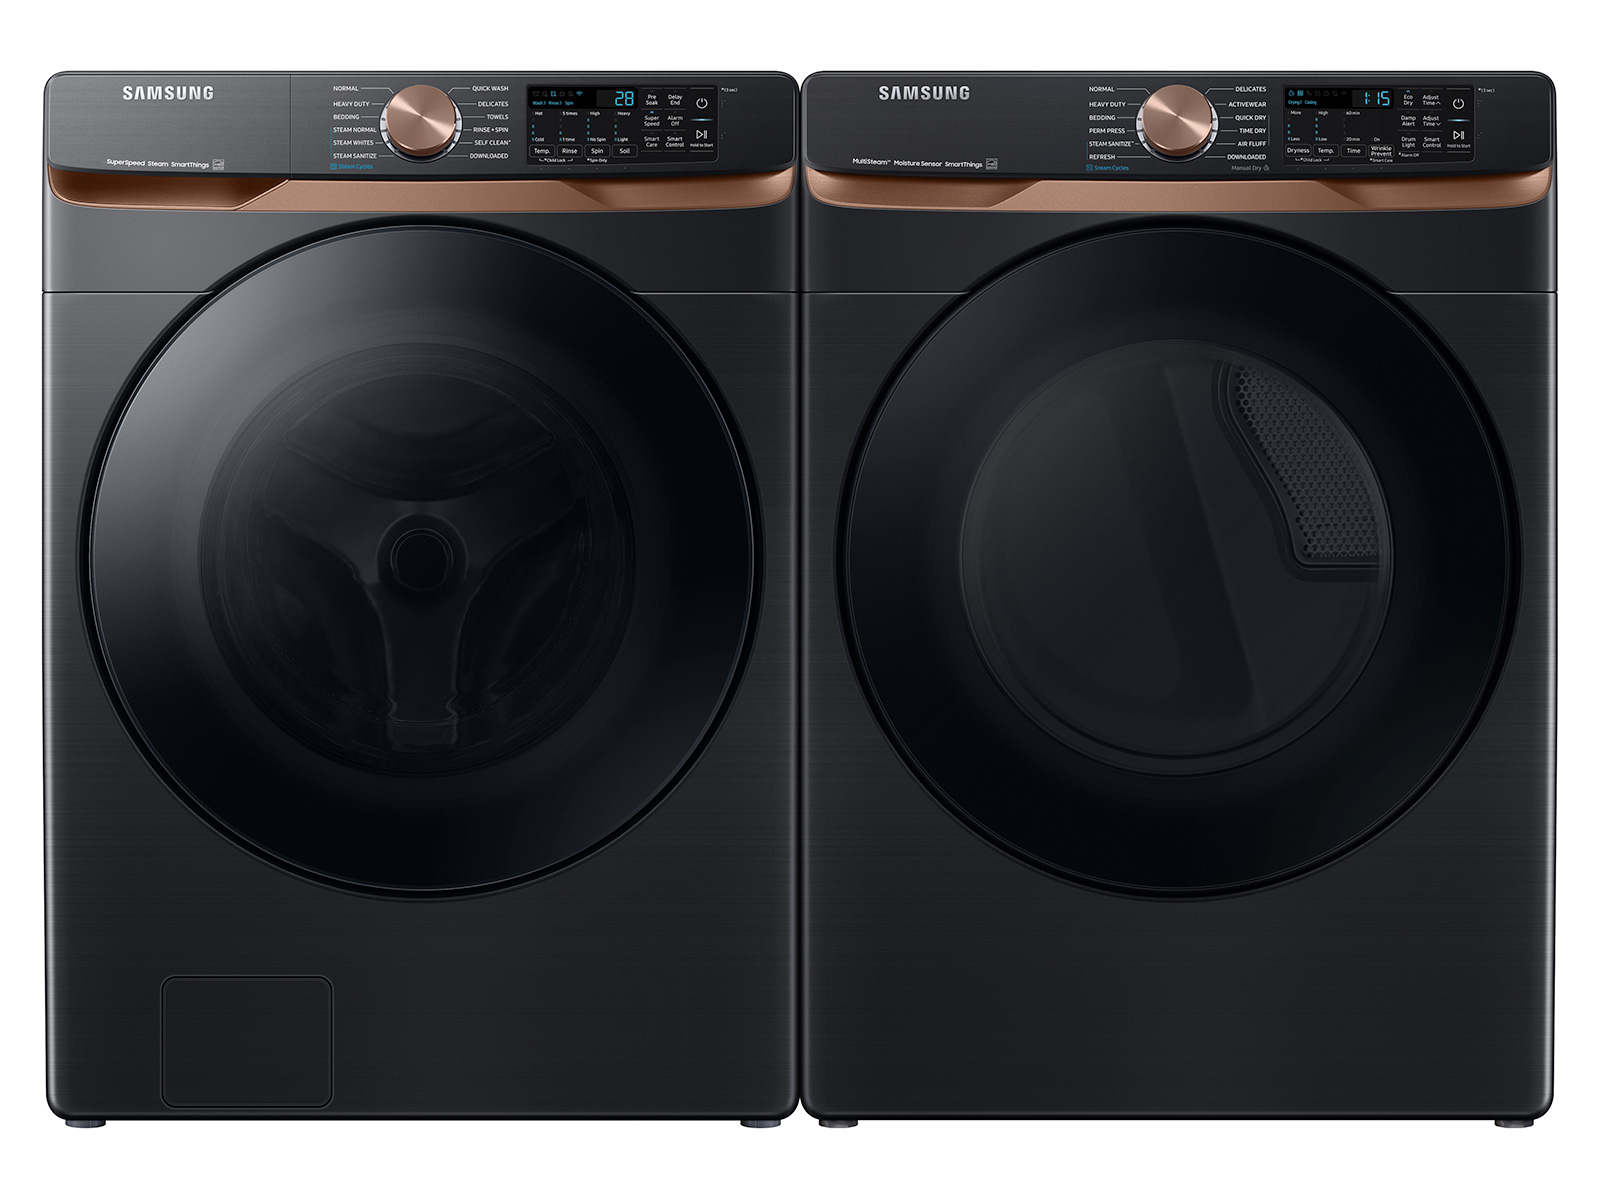 Photos - Washing Machine Samsung Extra Large Capacity Smart Front Load Washer with Super Speed Wash 